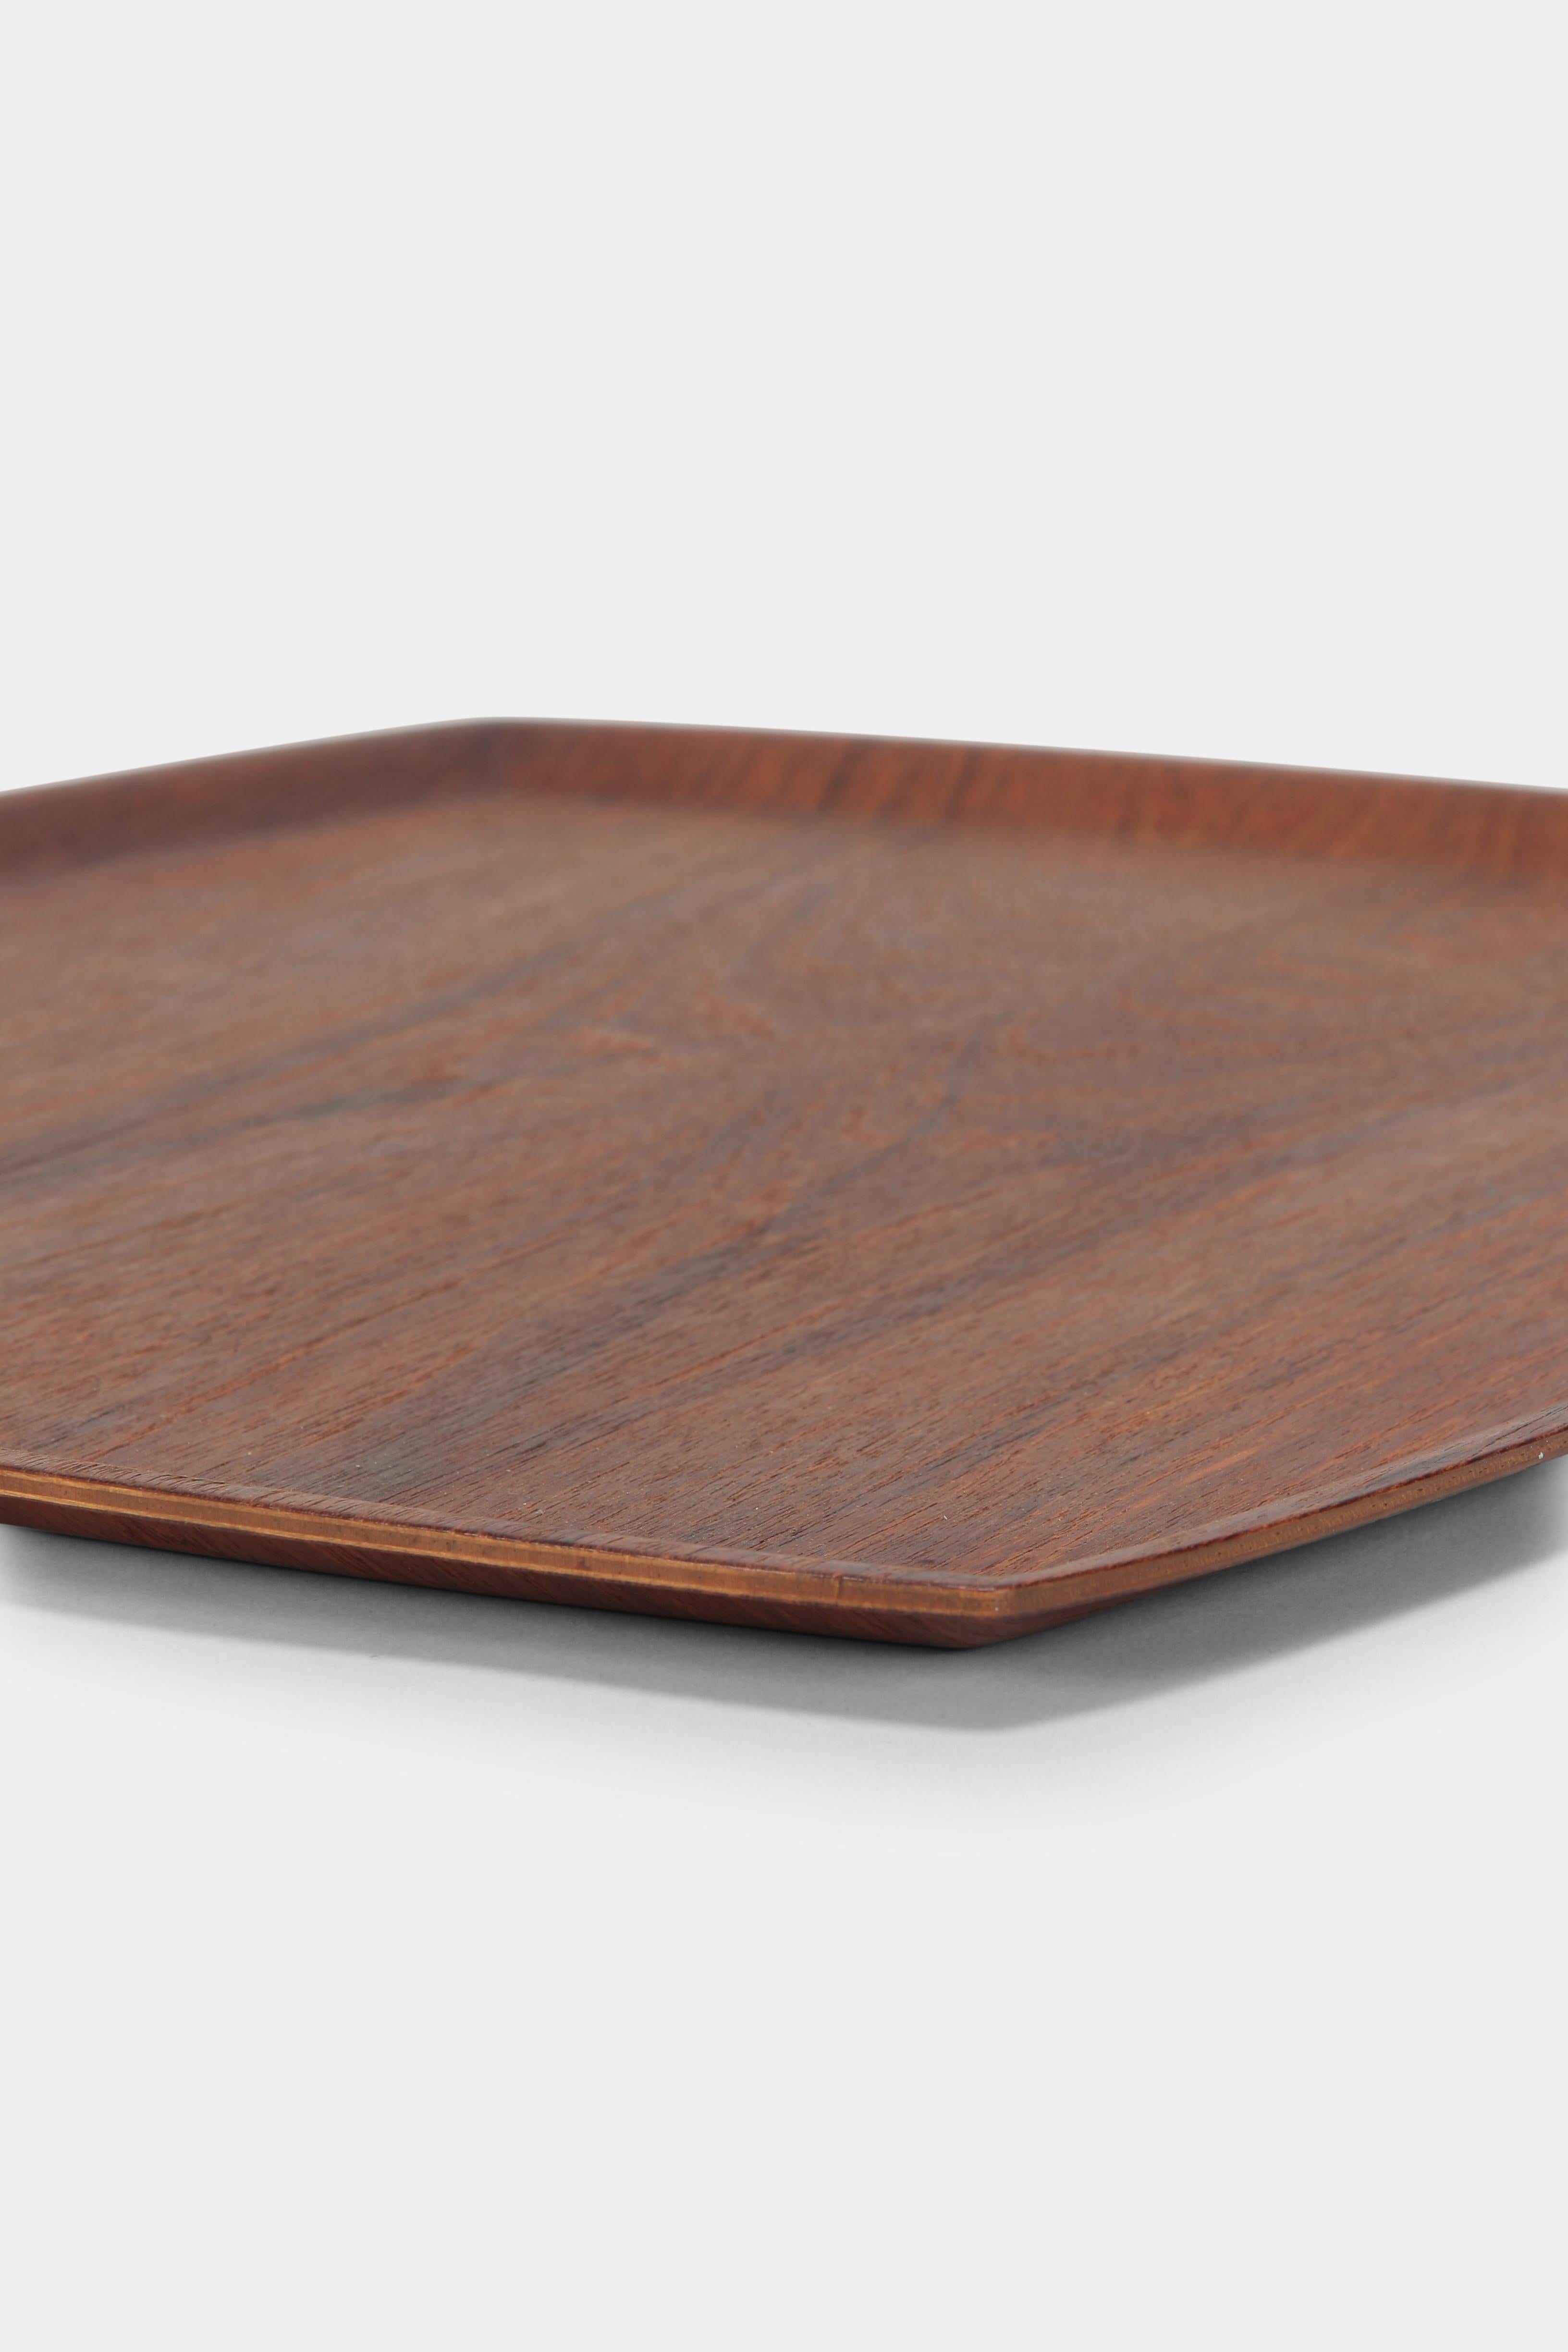 Mid-20th Century Swedish Serving Tray Teak, 1960s For Sale